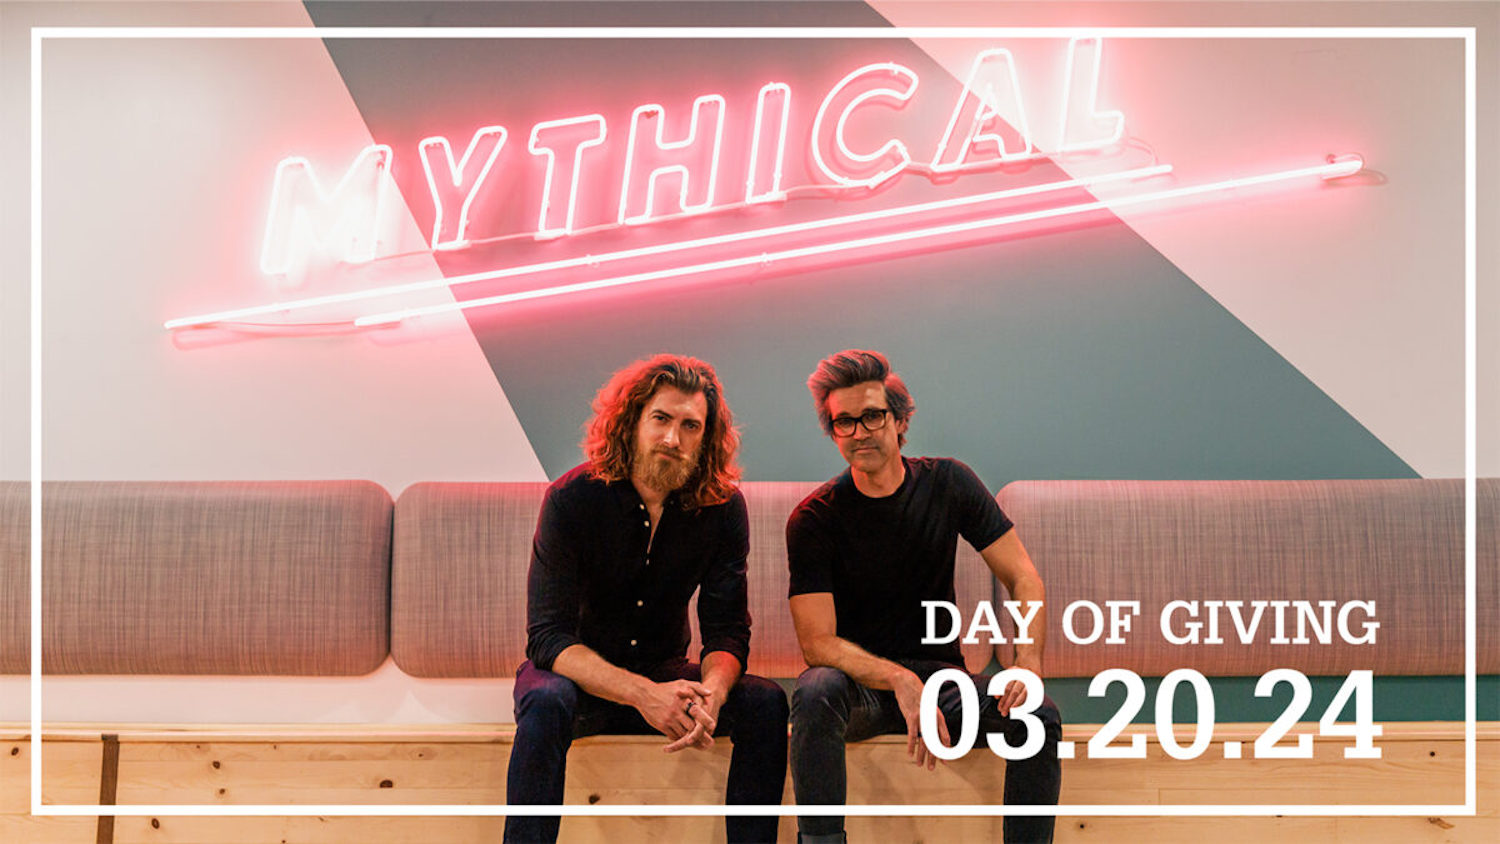 Rhett McLaughlin and Link Neal in front of a "Mythical" sign.